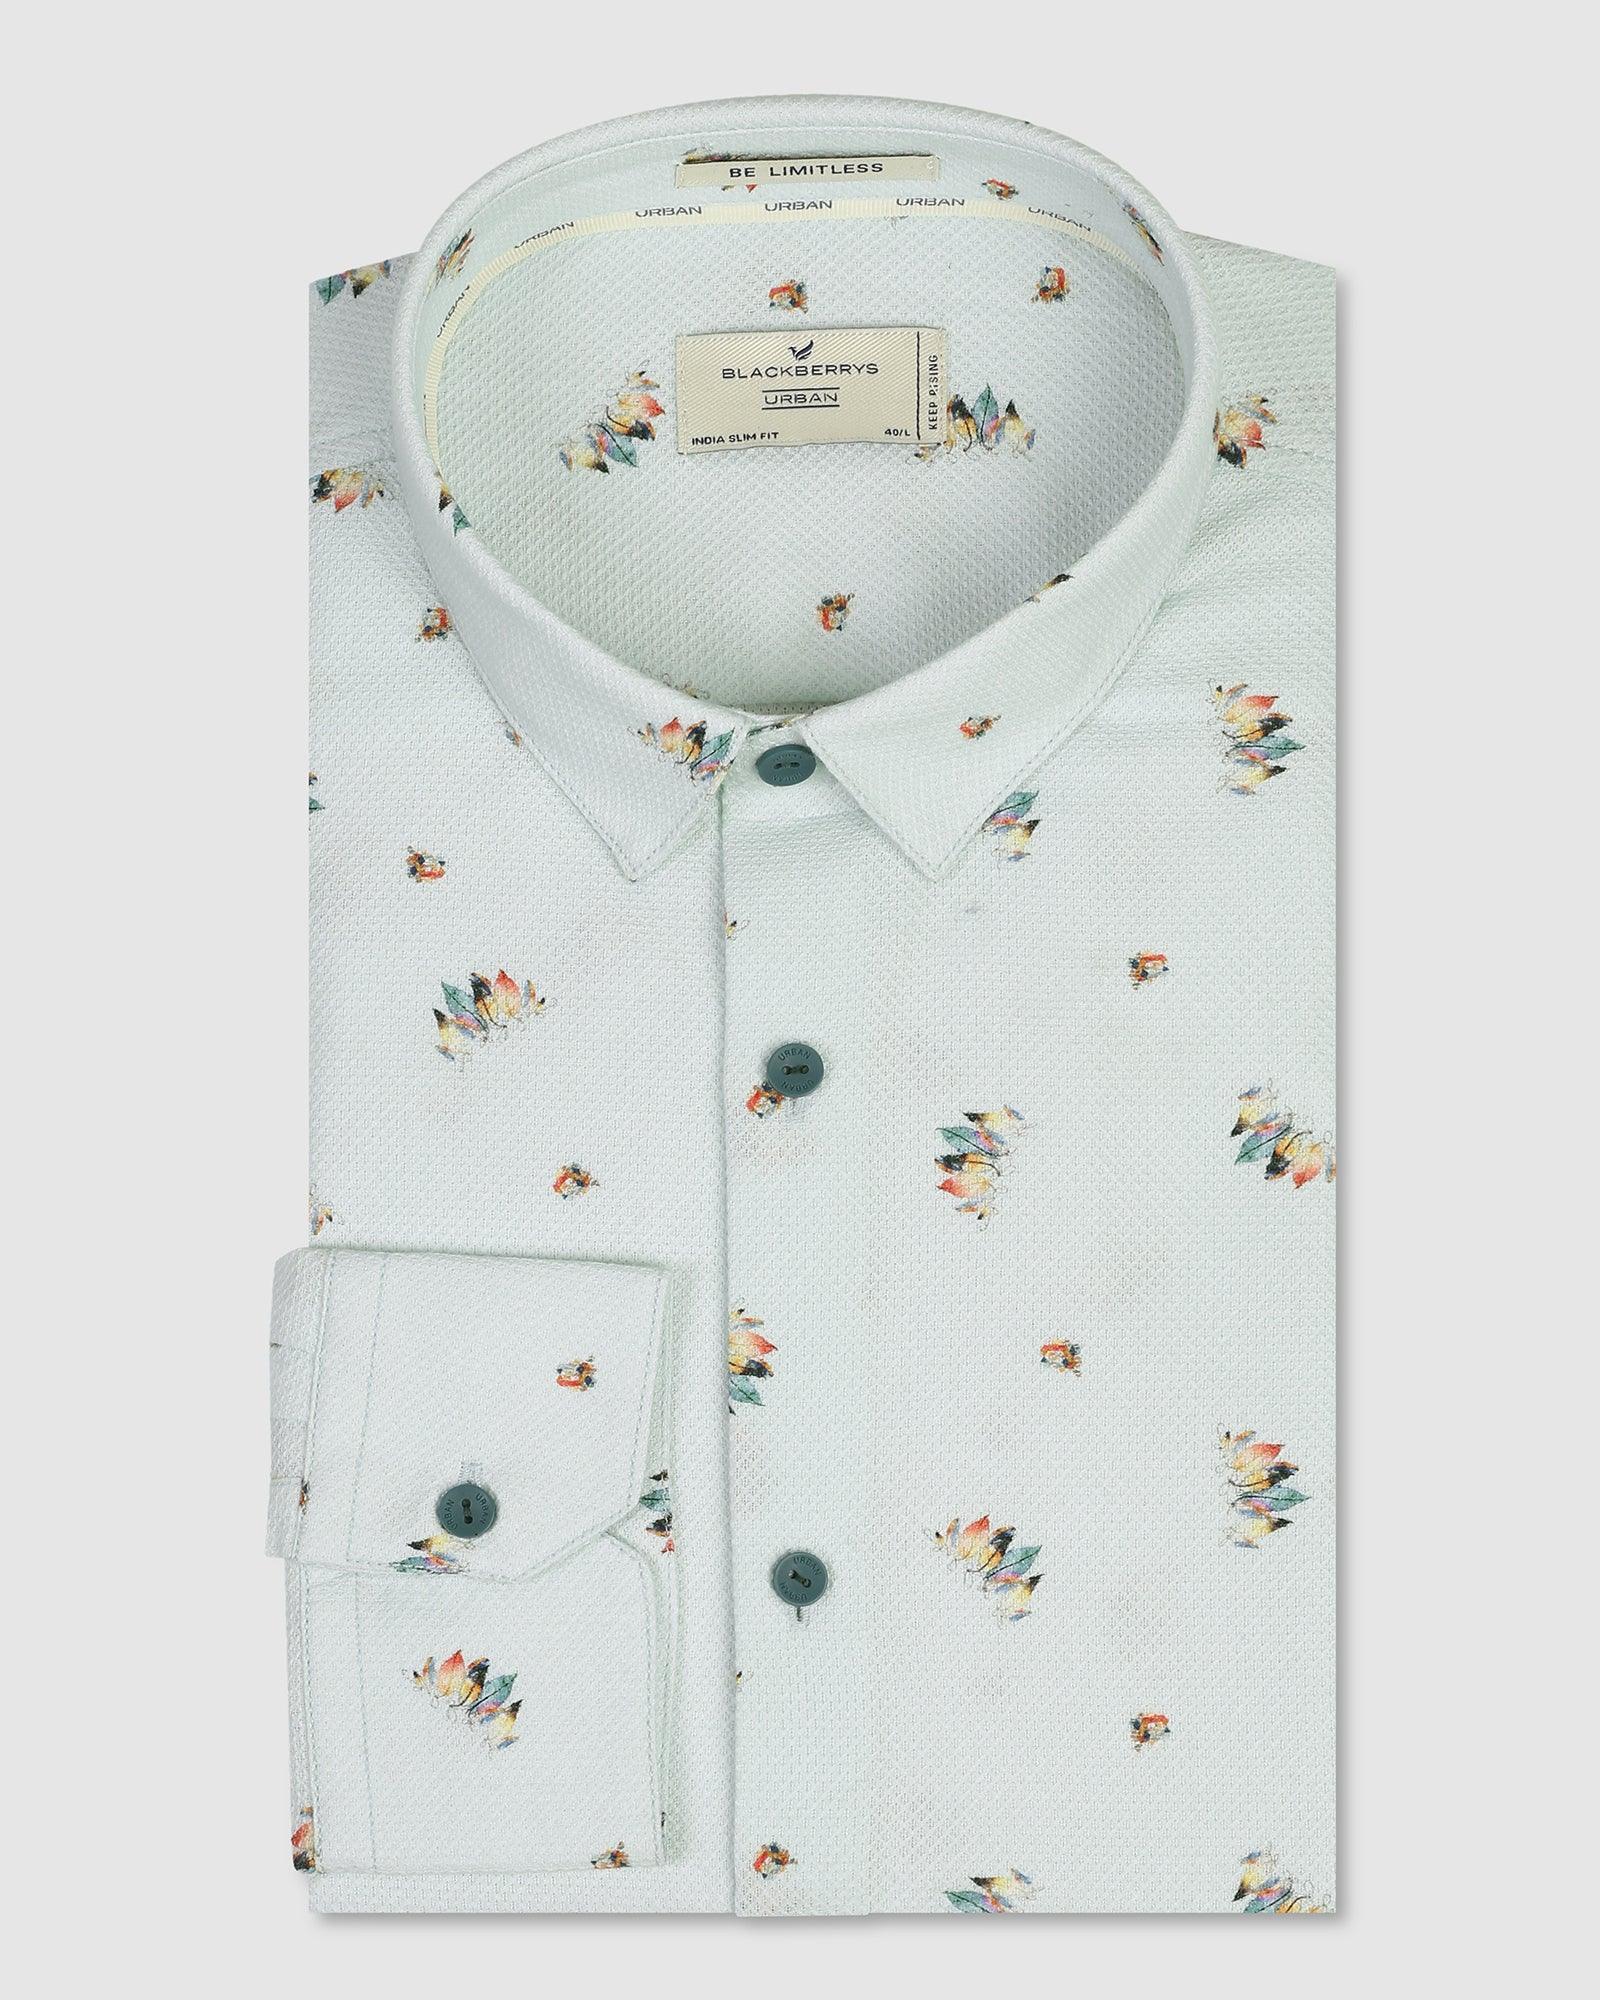 Casual Mint Printed Shirt - Ross